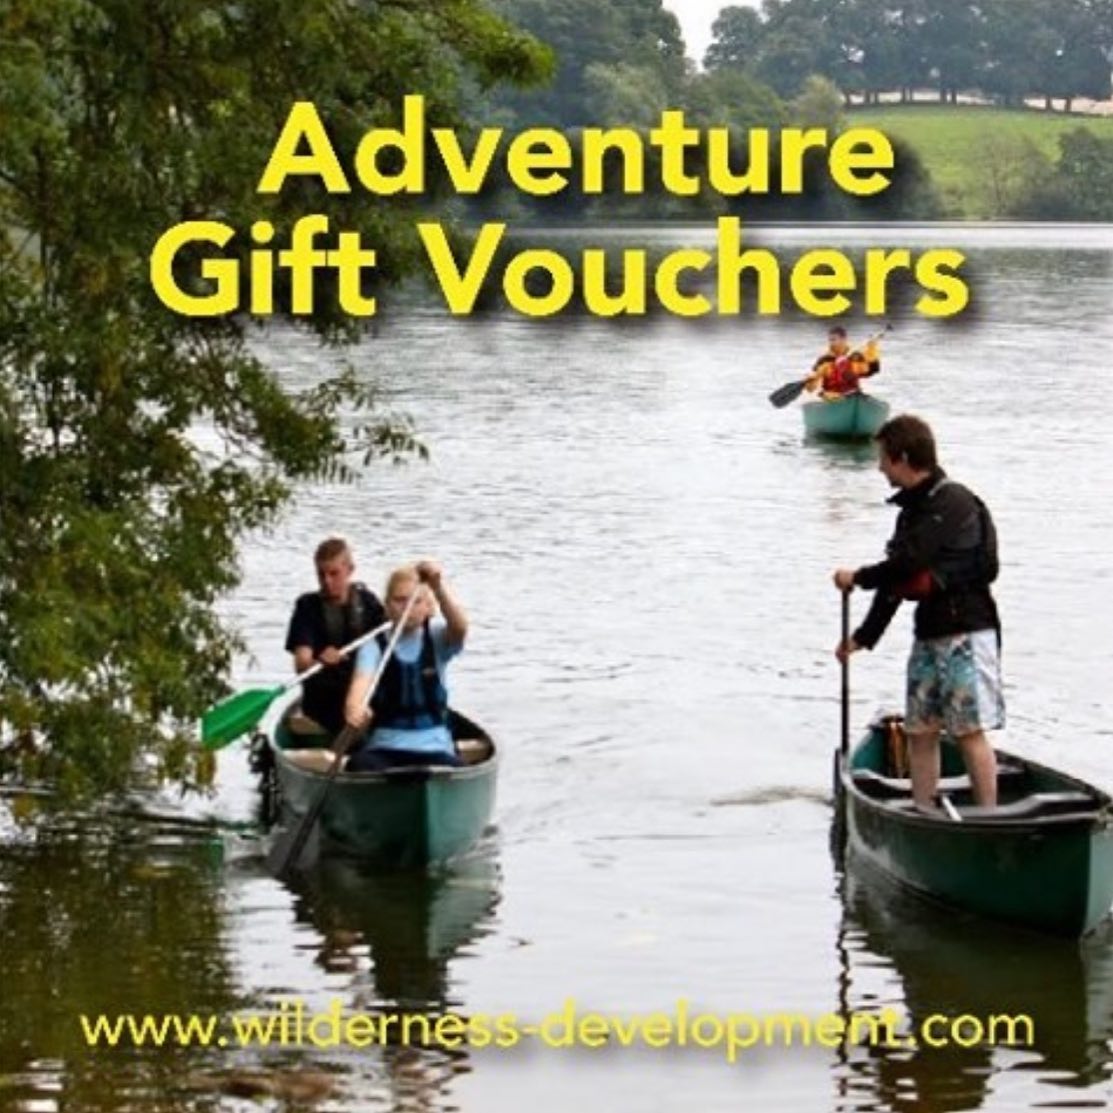 Started your Xmas shopping yet?? Give the gift of adventure this year, and have something exciting to look forward to in 2022! 🎄🎅 🎄

https://www.wilderness-development.com/booking-information/online-booking/adventure-activity-gift-vouchers

#wildernessdevelopment #christmas #christmasgifts #christmasiscoming #giftideas #christmastime #giftvouchers #vouchers #gifts #experiencegifts #experiencegifting #trysomethingnew #trysomethingdifferent #outdooractivities #outdoorpursuits #adventures #adventuretime #experience #thegreatoutdoors #outdoortherapy #lifeofadventure #liveoutdoors